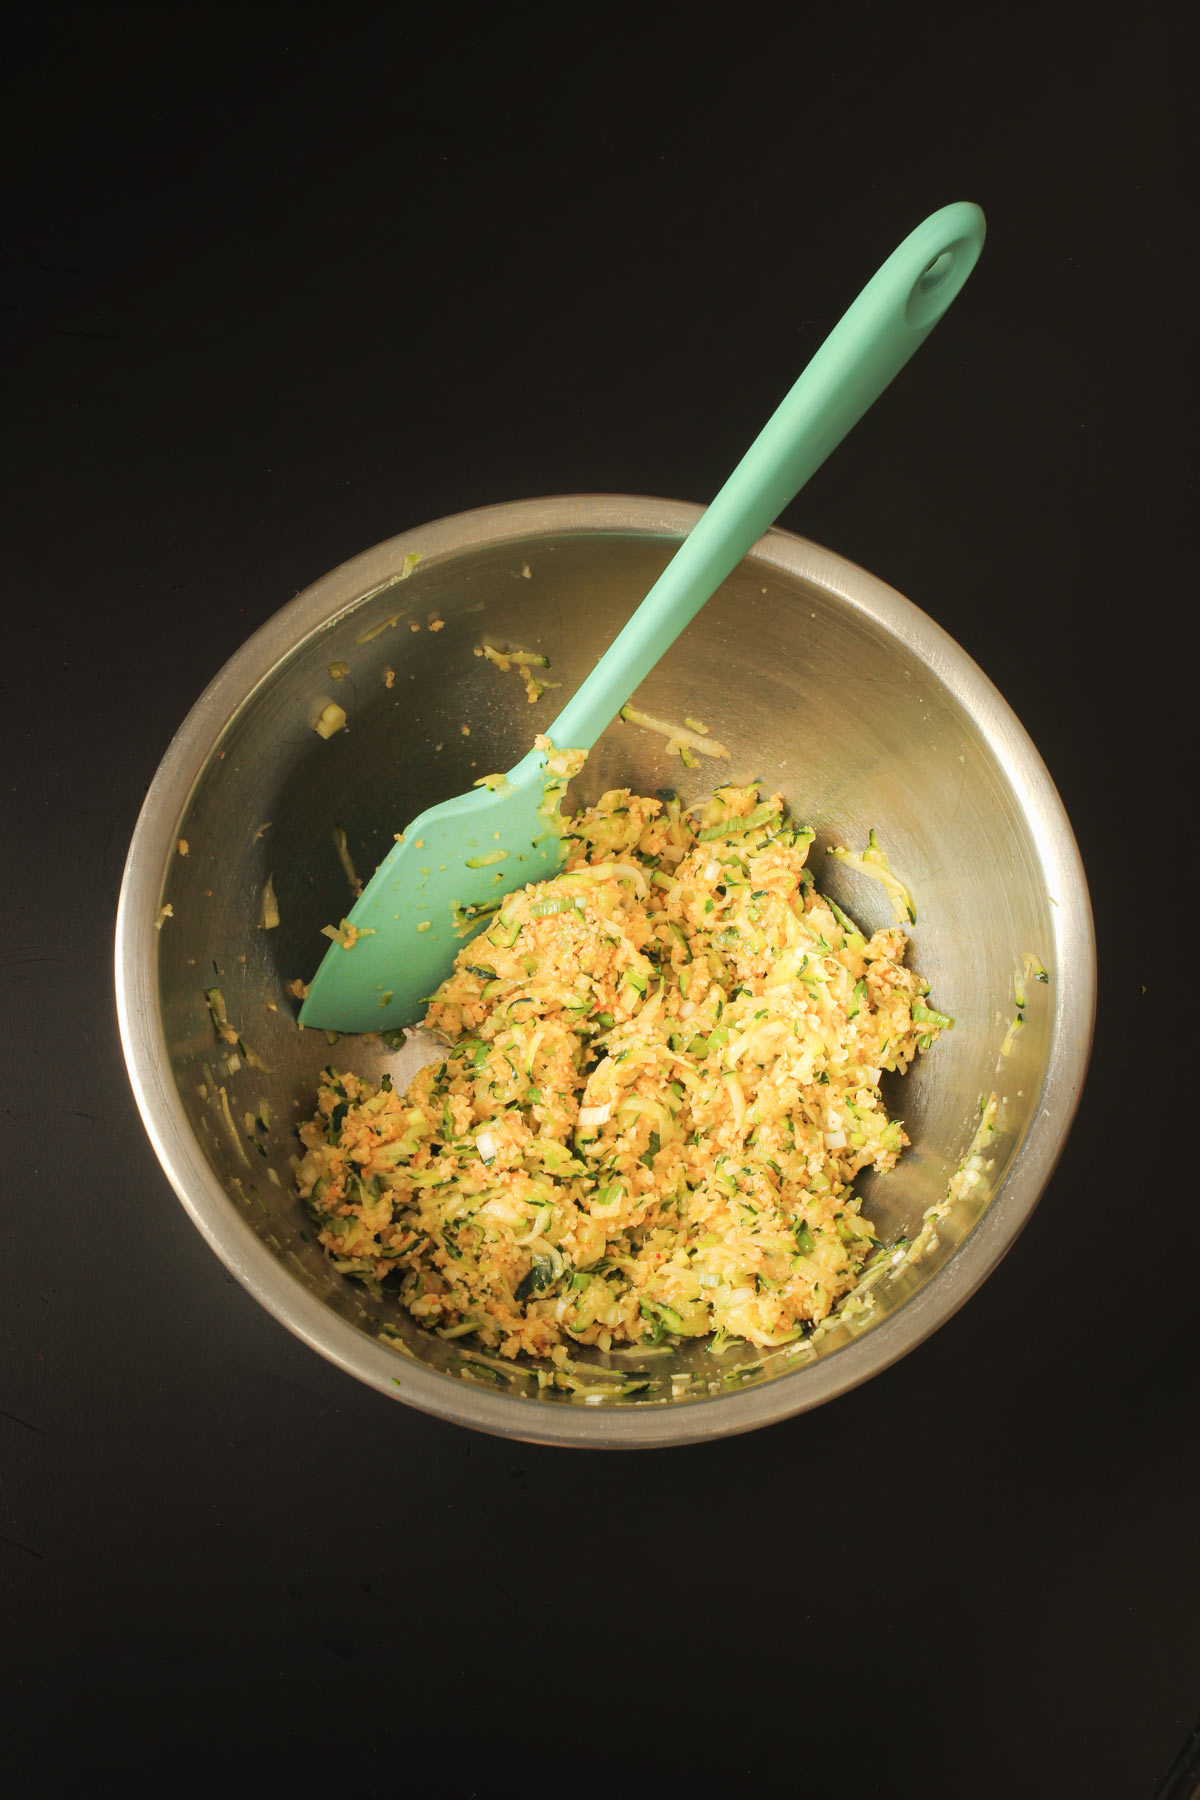 zucchini fritter mixture combined in mixing bowl with teal spatula.